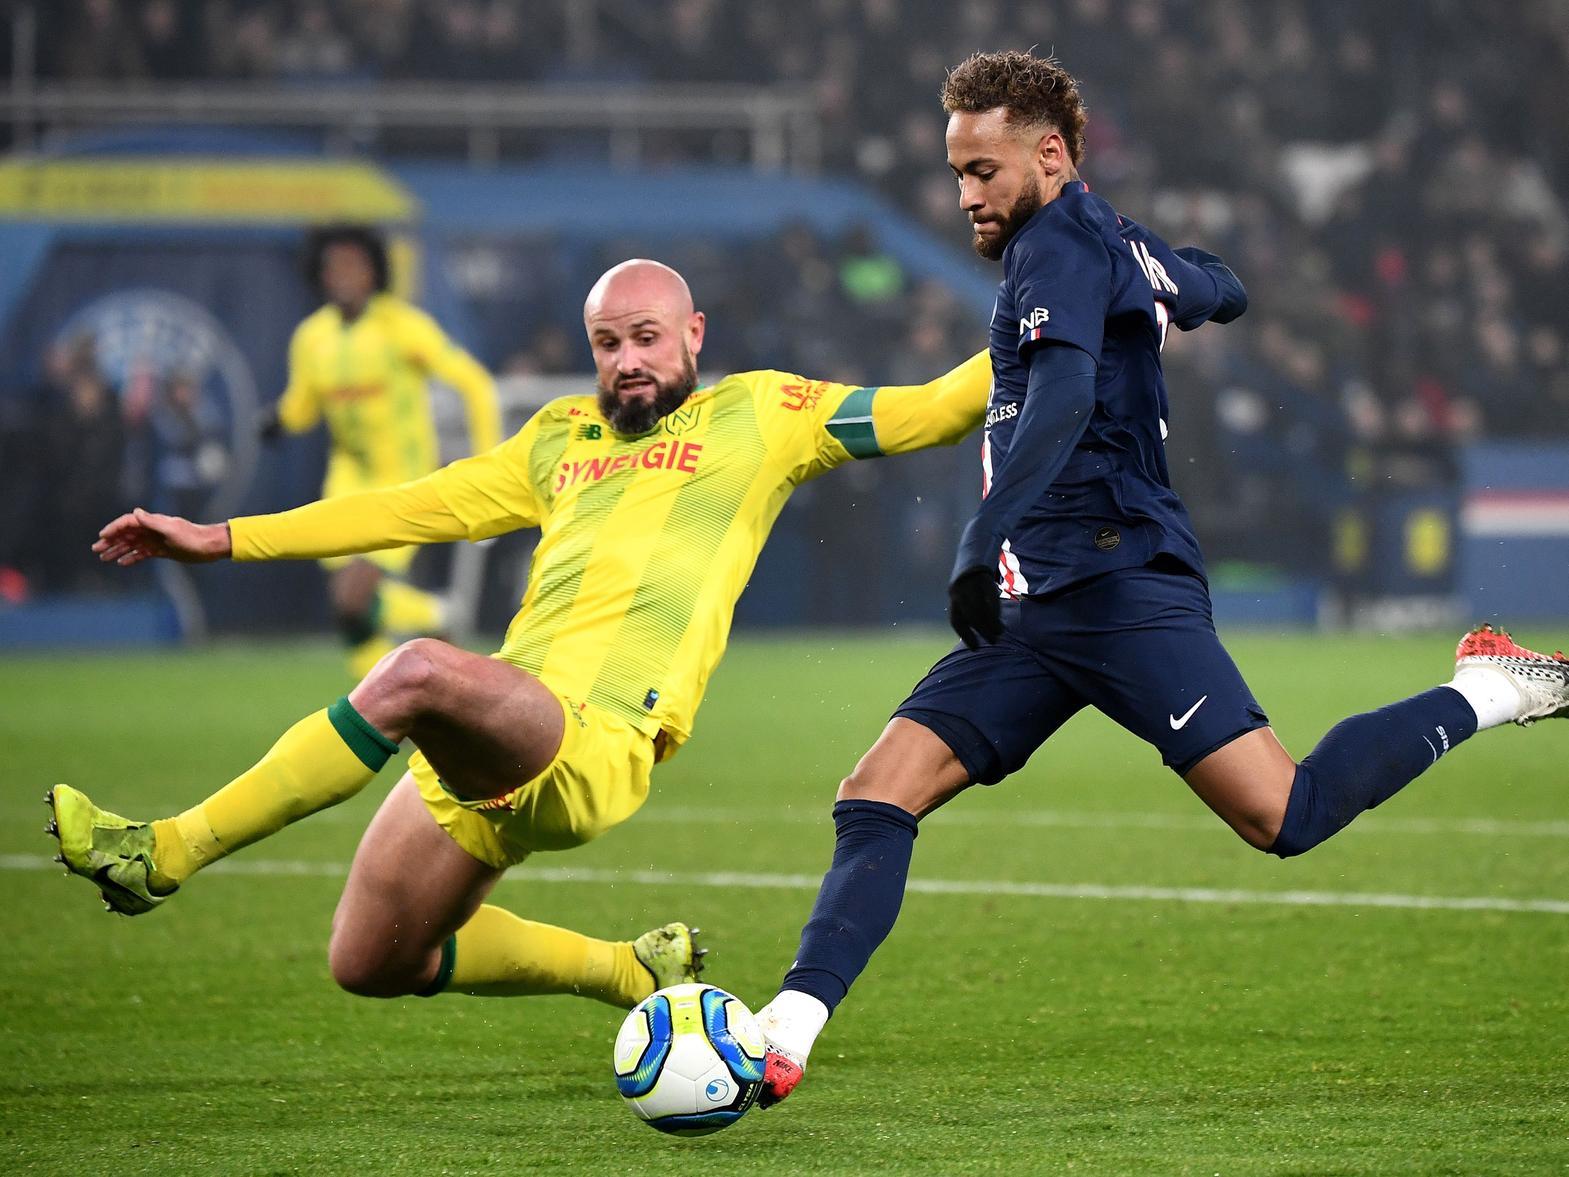 Nottingham Forest have been linked with a move for Nantes defender Nicolas Pallois, but are unlikely to lure the 32-year-old away in January as he is highly valued by his club. (L'Equipe)